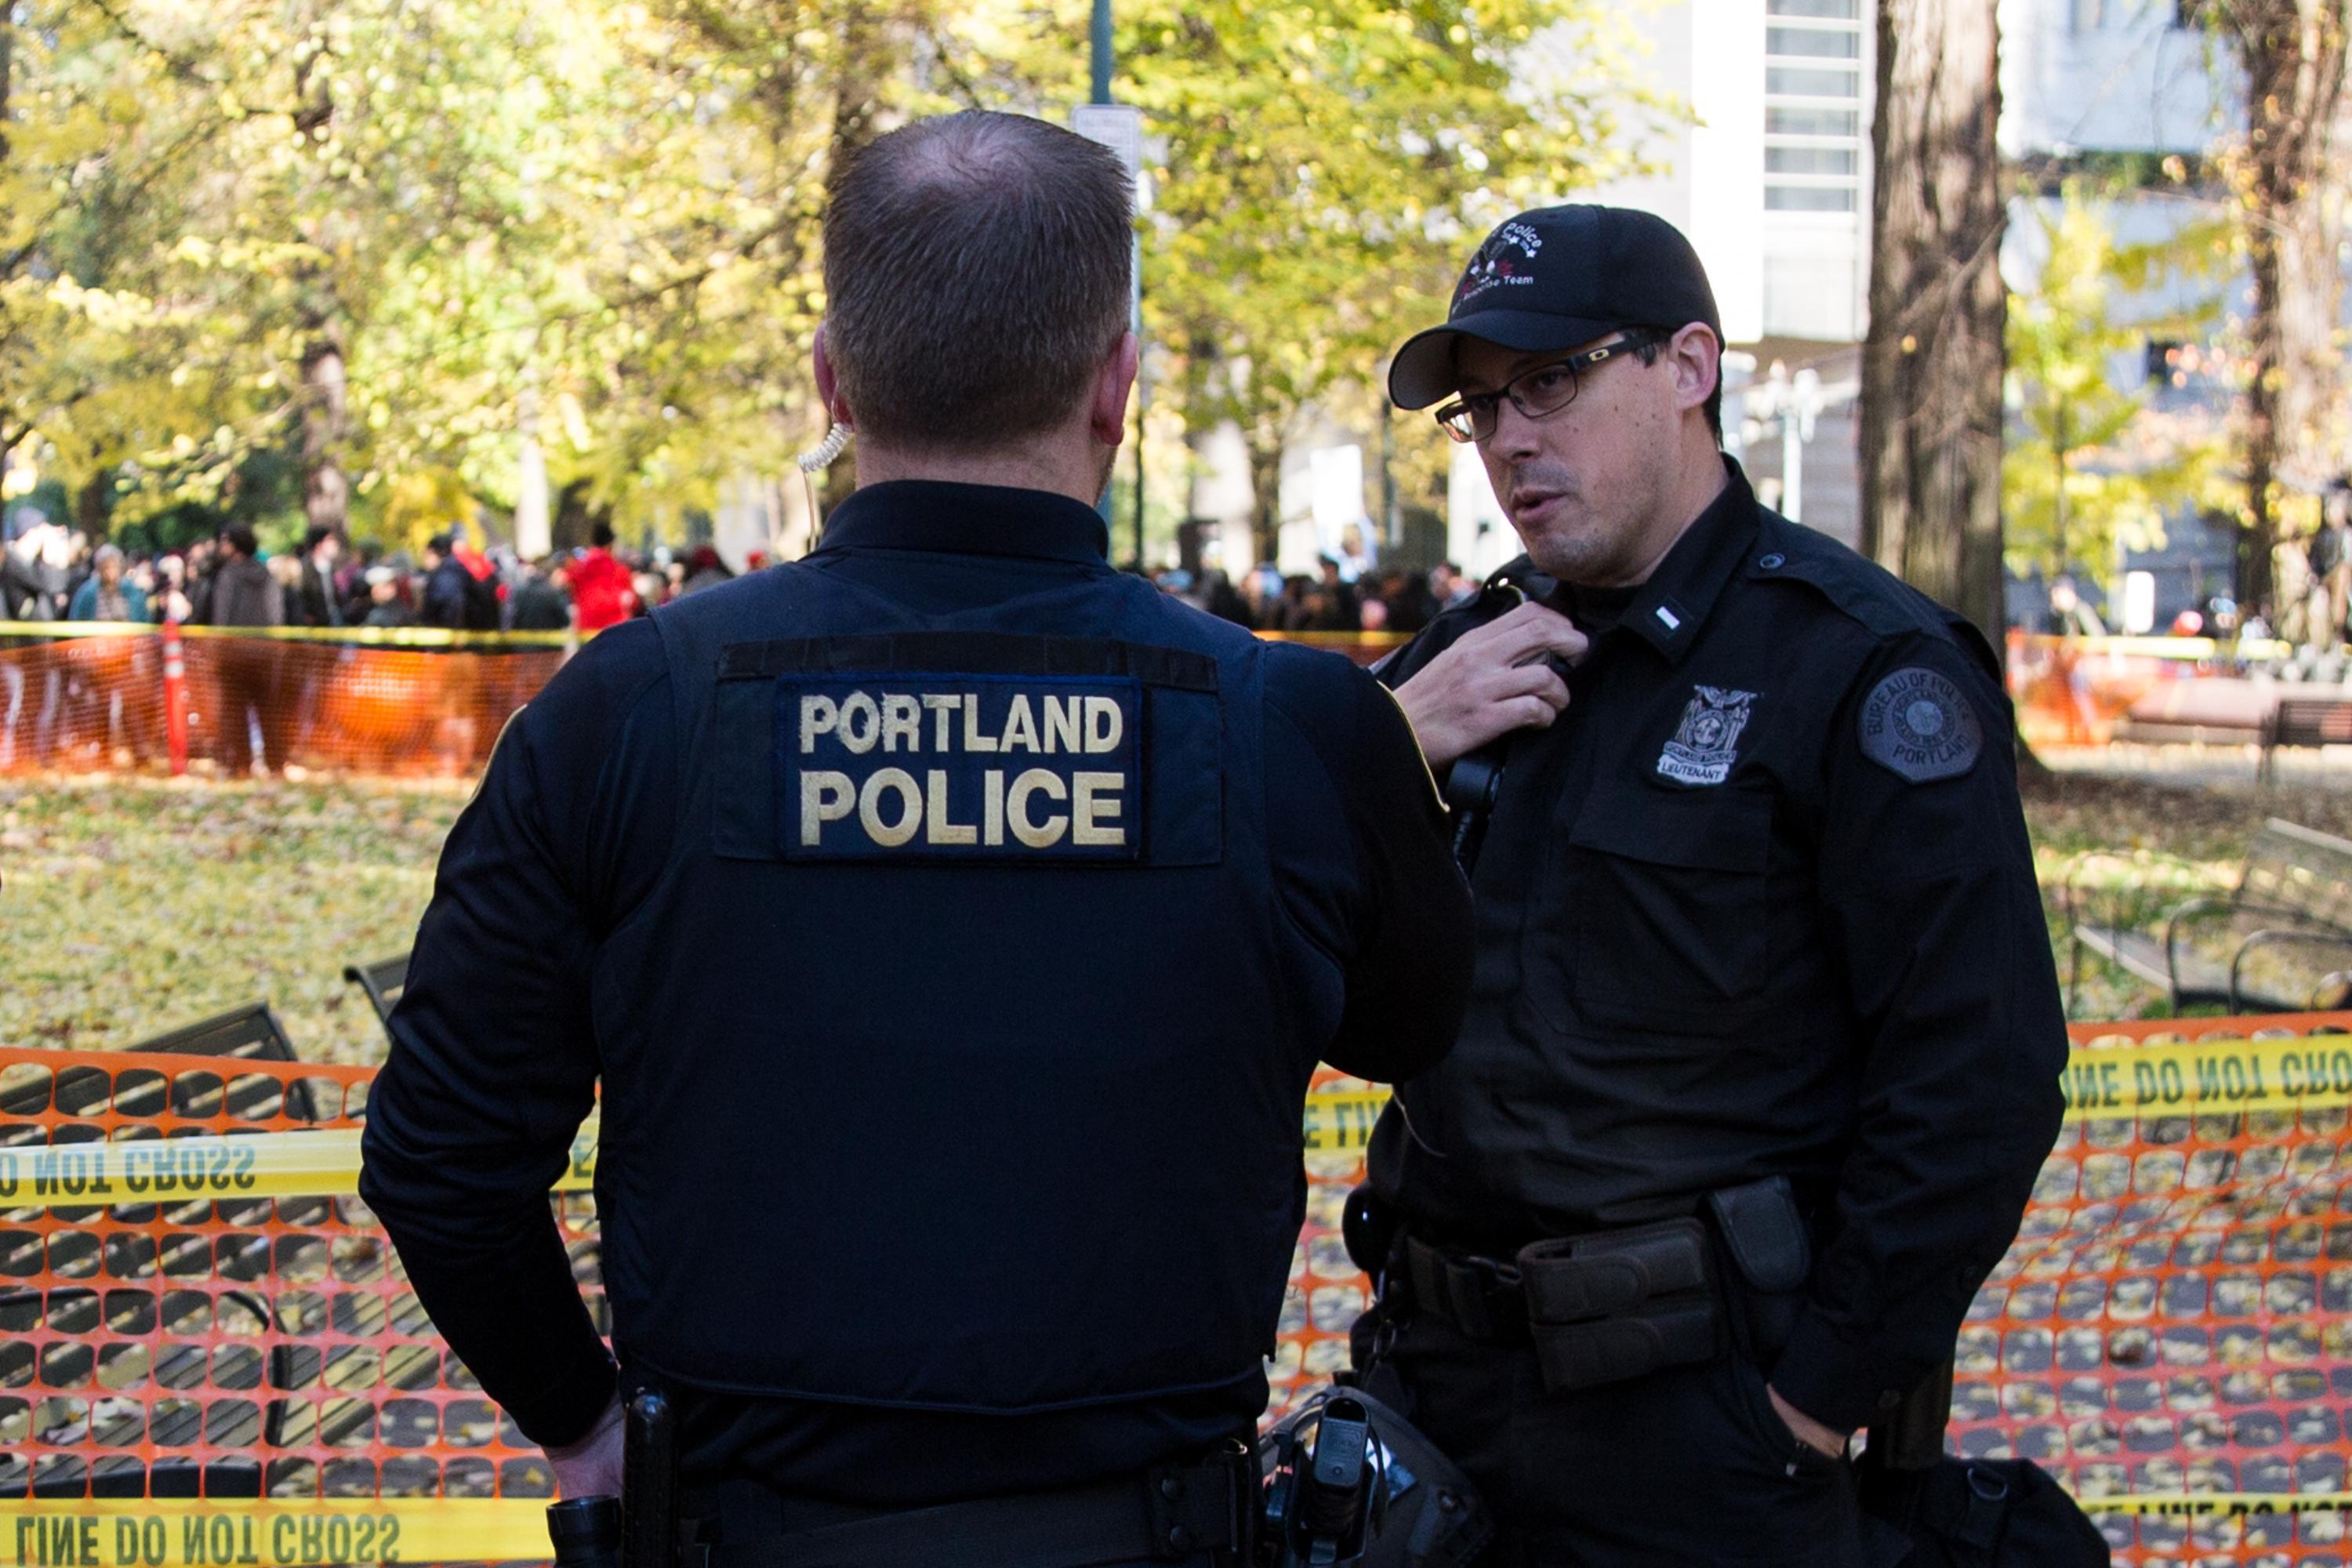 Portland police training on protests ends with slide showing mock prayer  for 'dirty hippy,' prompts investigation 